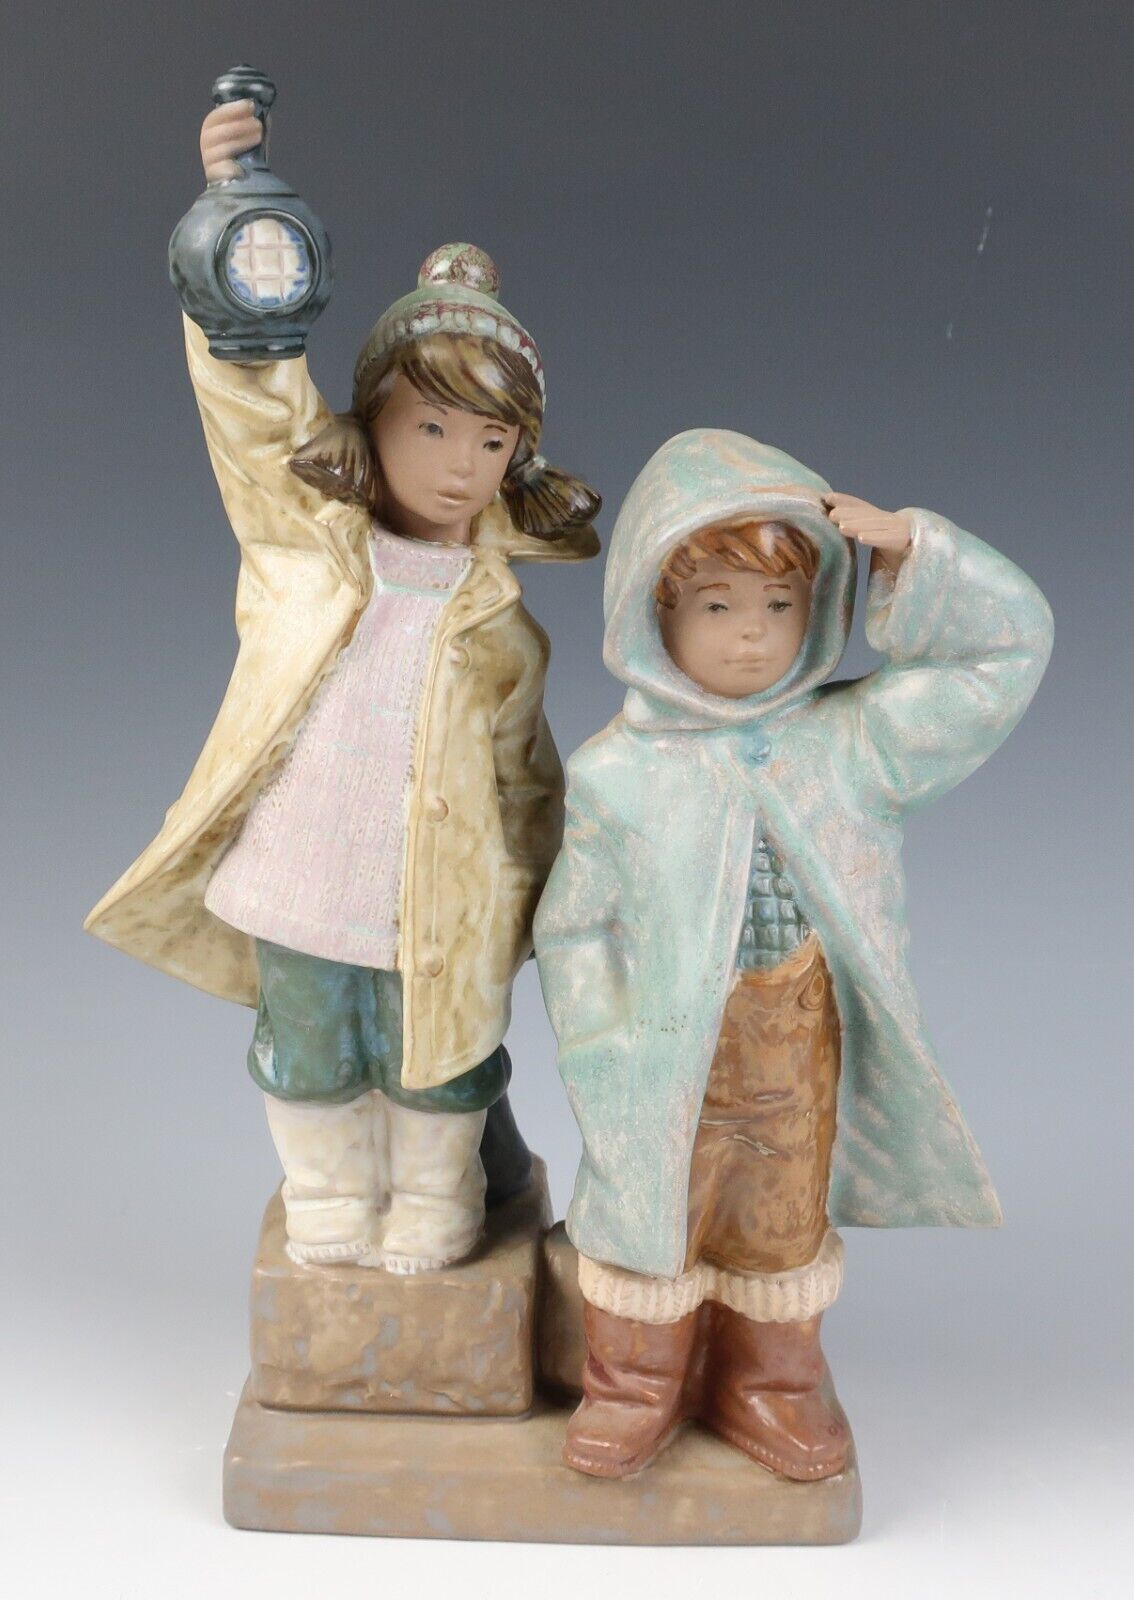 MINT Lladro Gres Children with Lantern Figurine AHOY THERE Nautical Seaside 2173